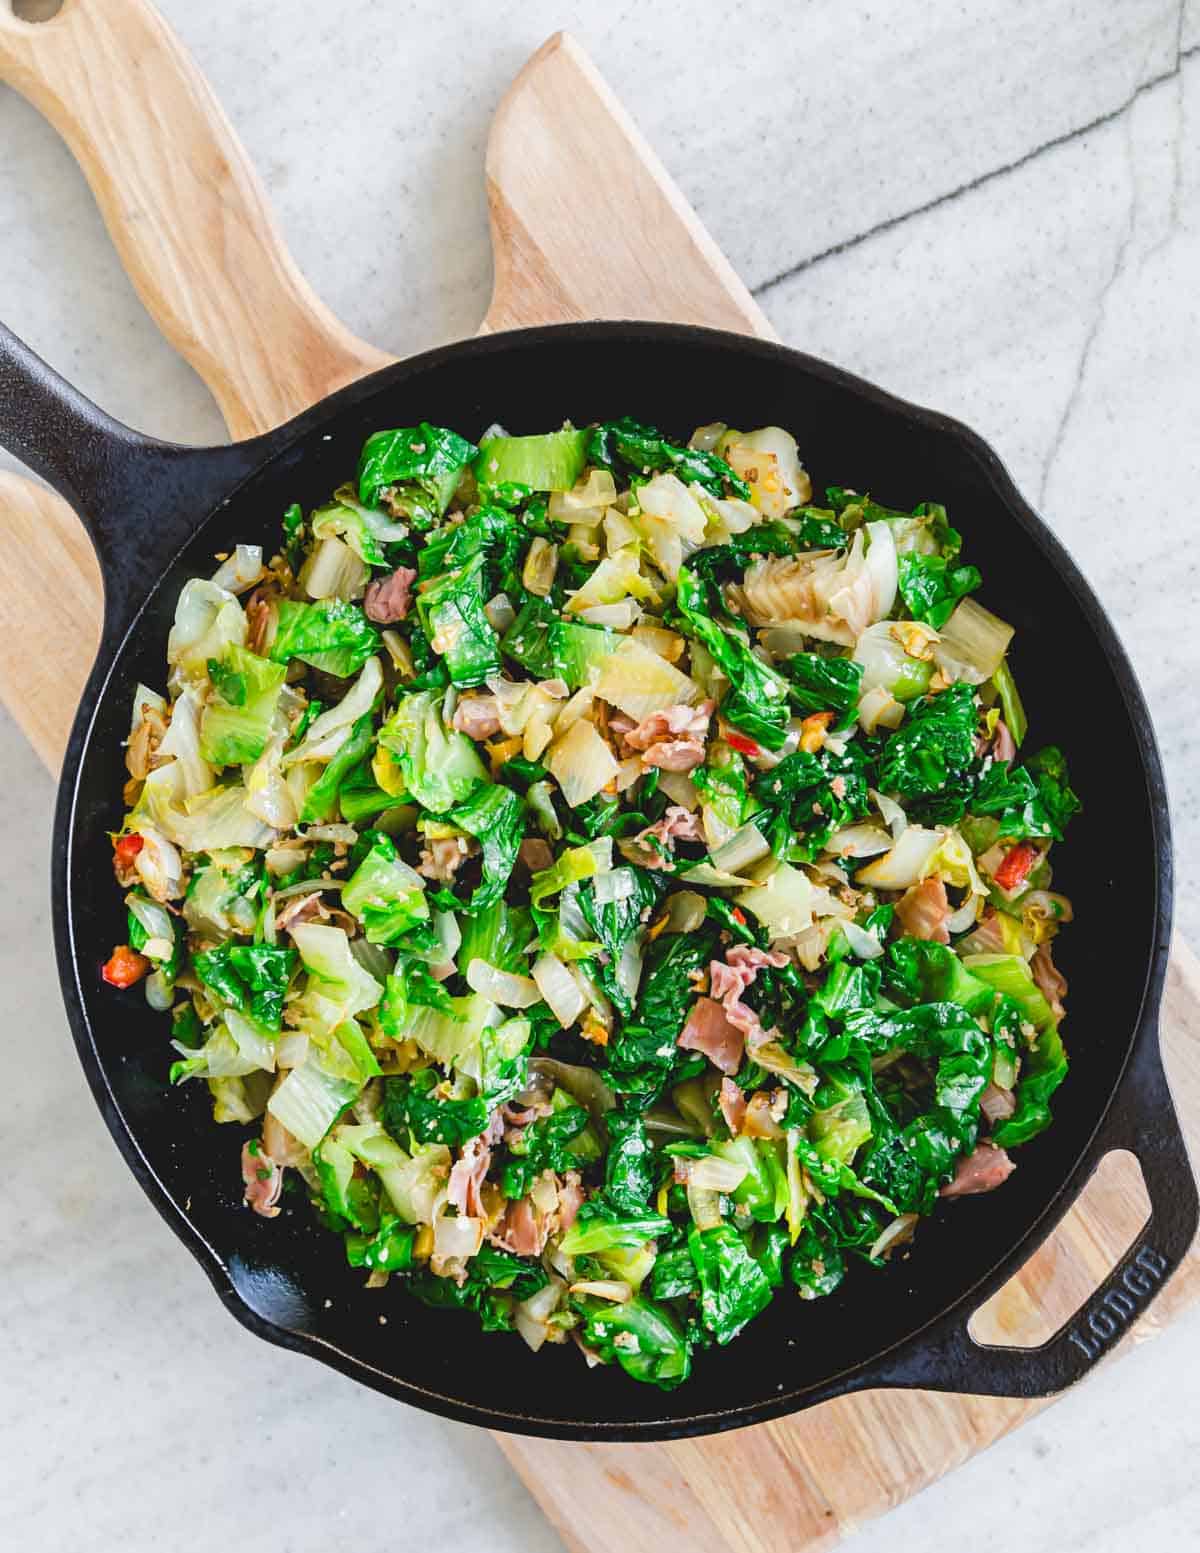 Escarole greens with onions, pickled hot peppers, prosciutto and garlic in a cast iron skillet on a wooden cutting board.